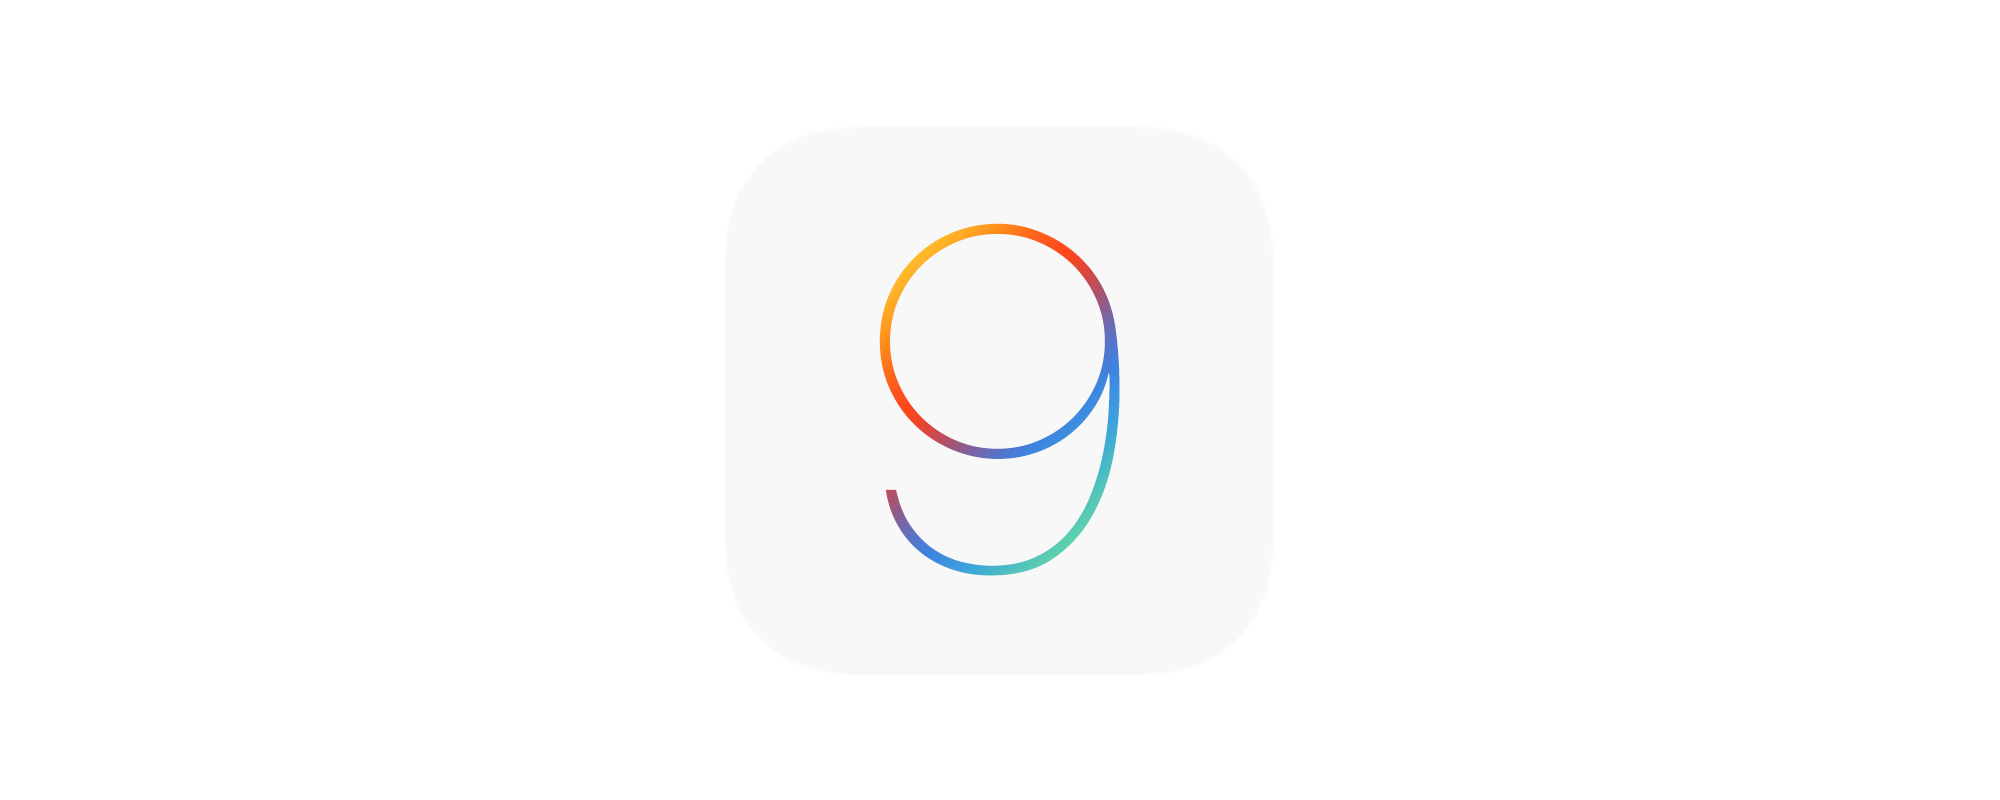 ios 9 signed download